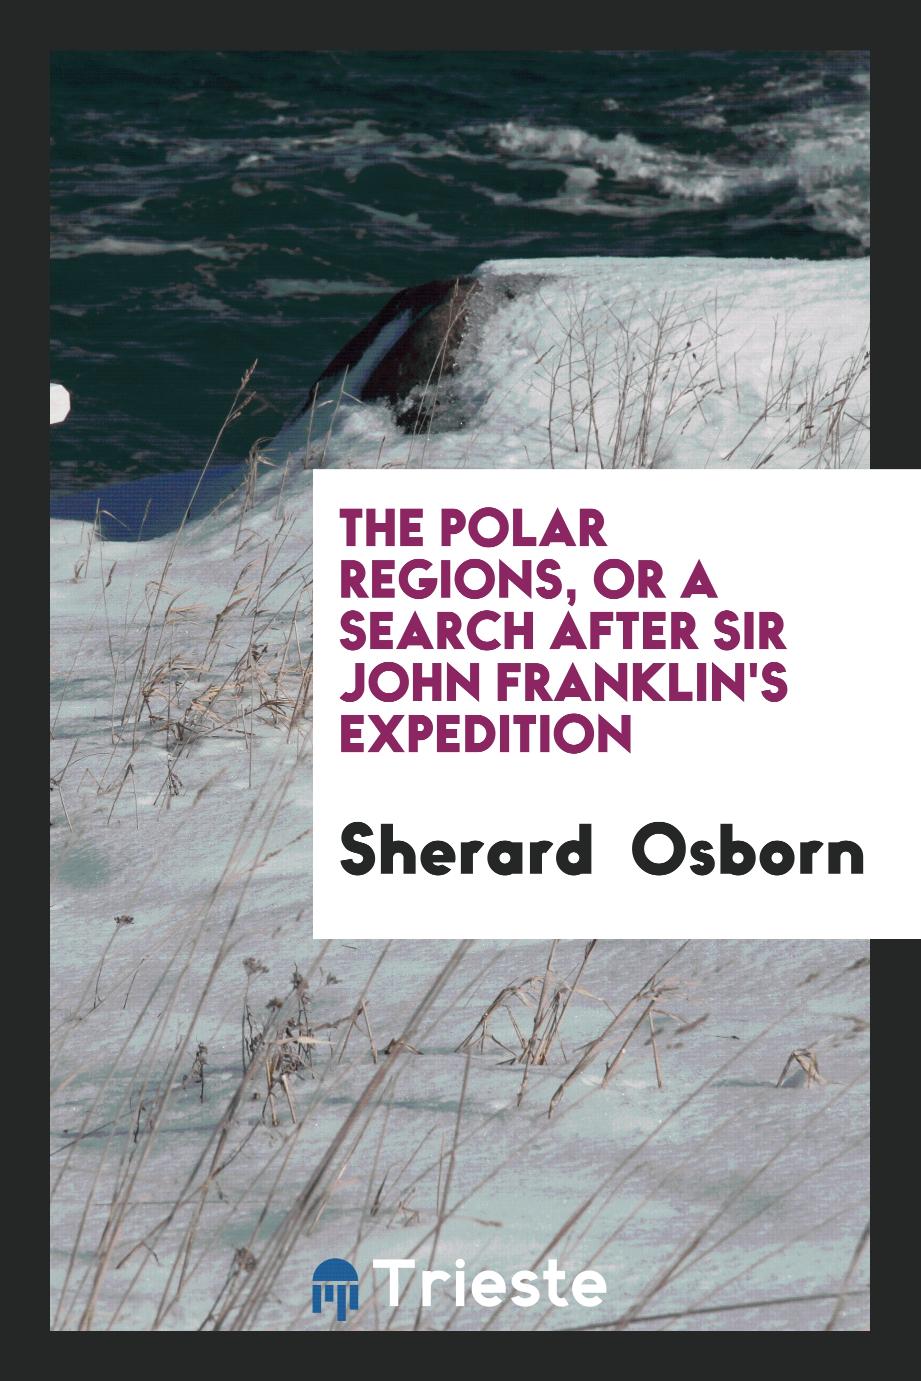 The Polar Regions, Or a Search After Sir John Franklin's Expedition